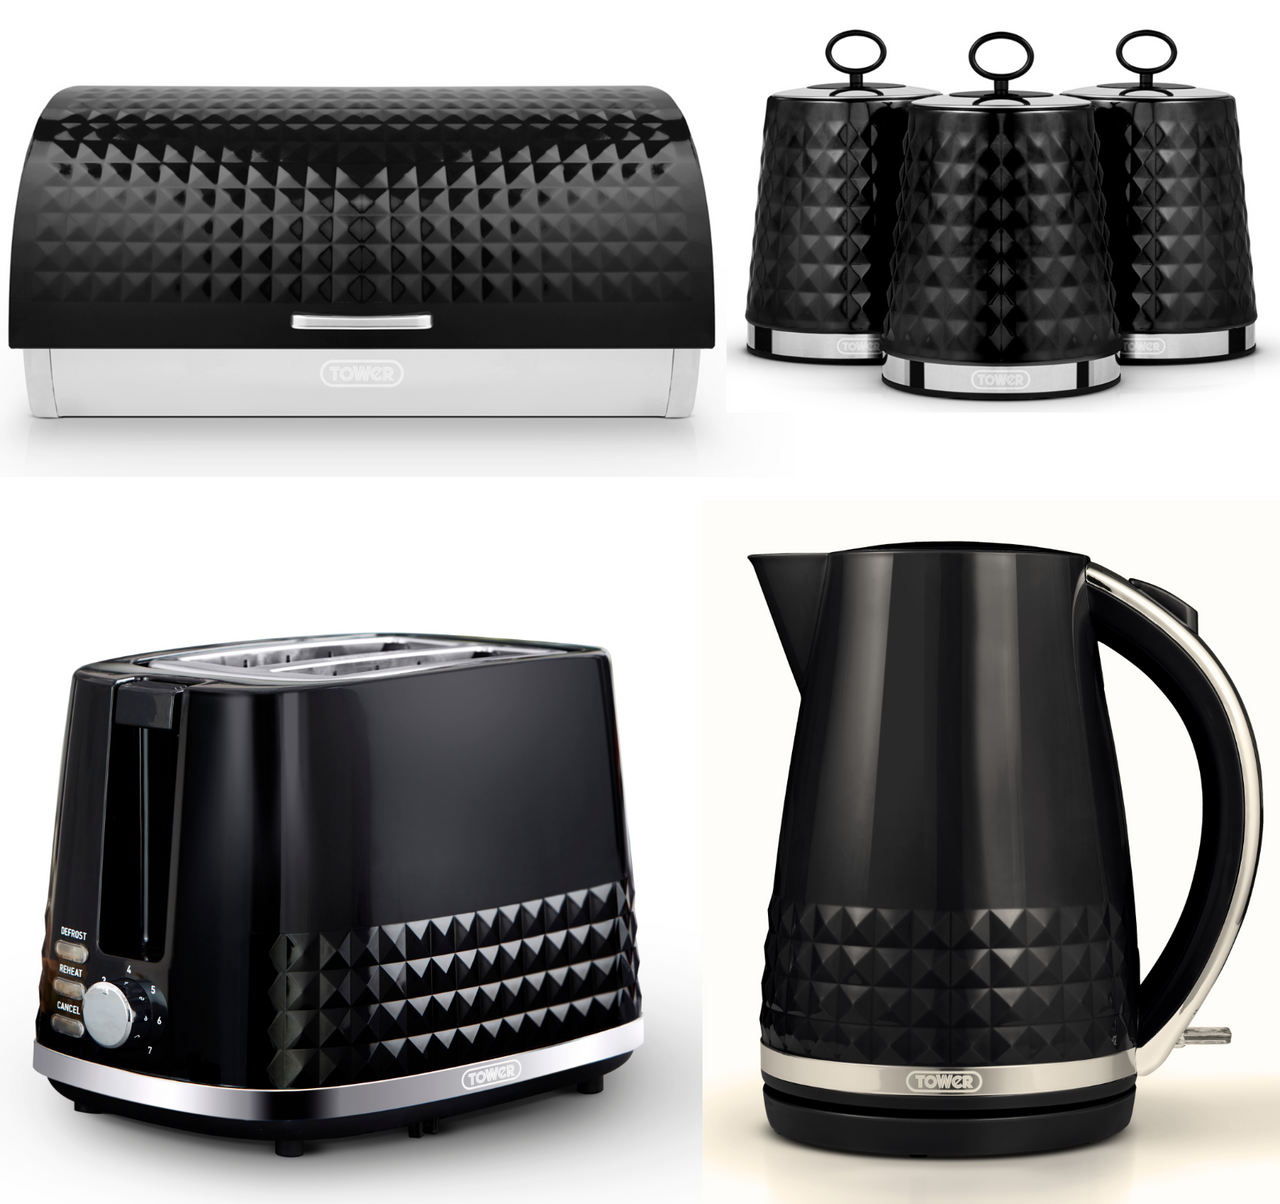 Tower Solitaire Jug Kettle, 2 Slice Toaster, Bread Bin & Canisters Set of 6 in Black & Chrome